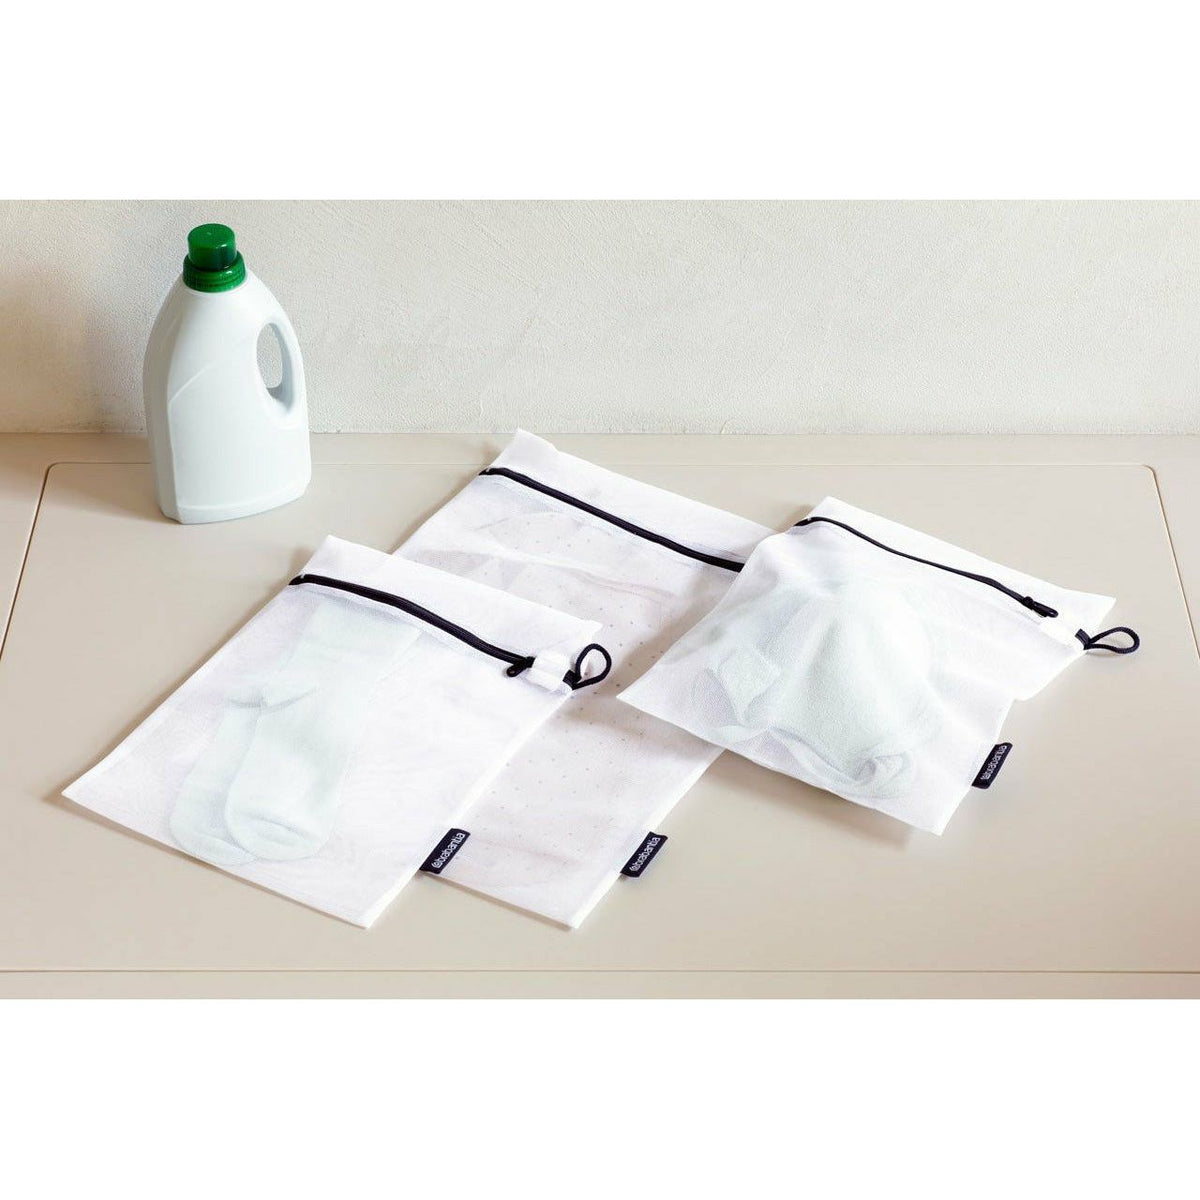 Brabantia Clothes Wash Bag Pack of 3 - White | 149221 (7611394162876)